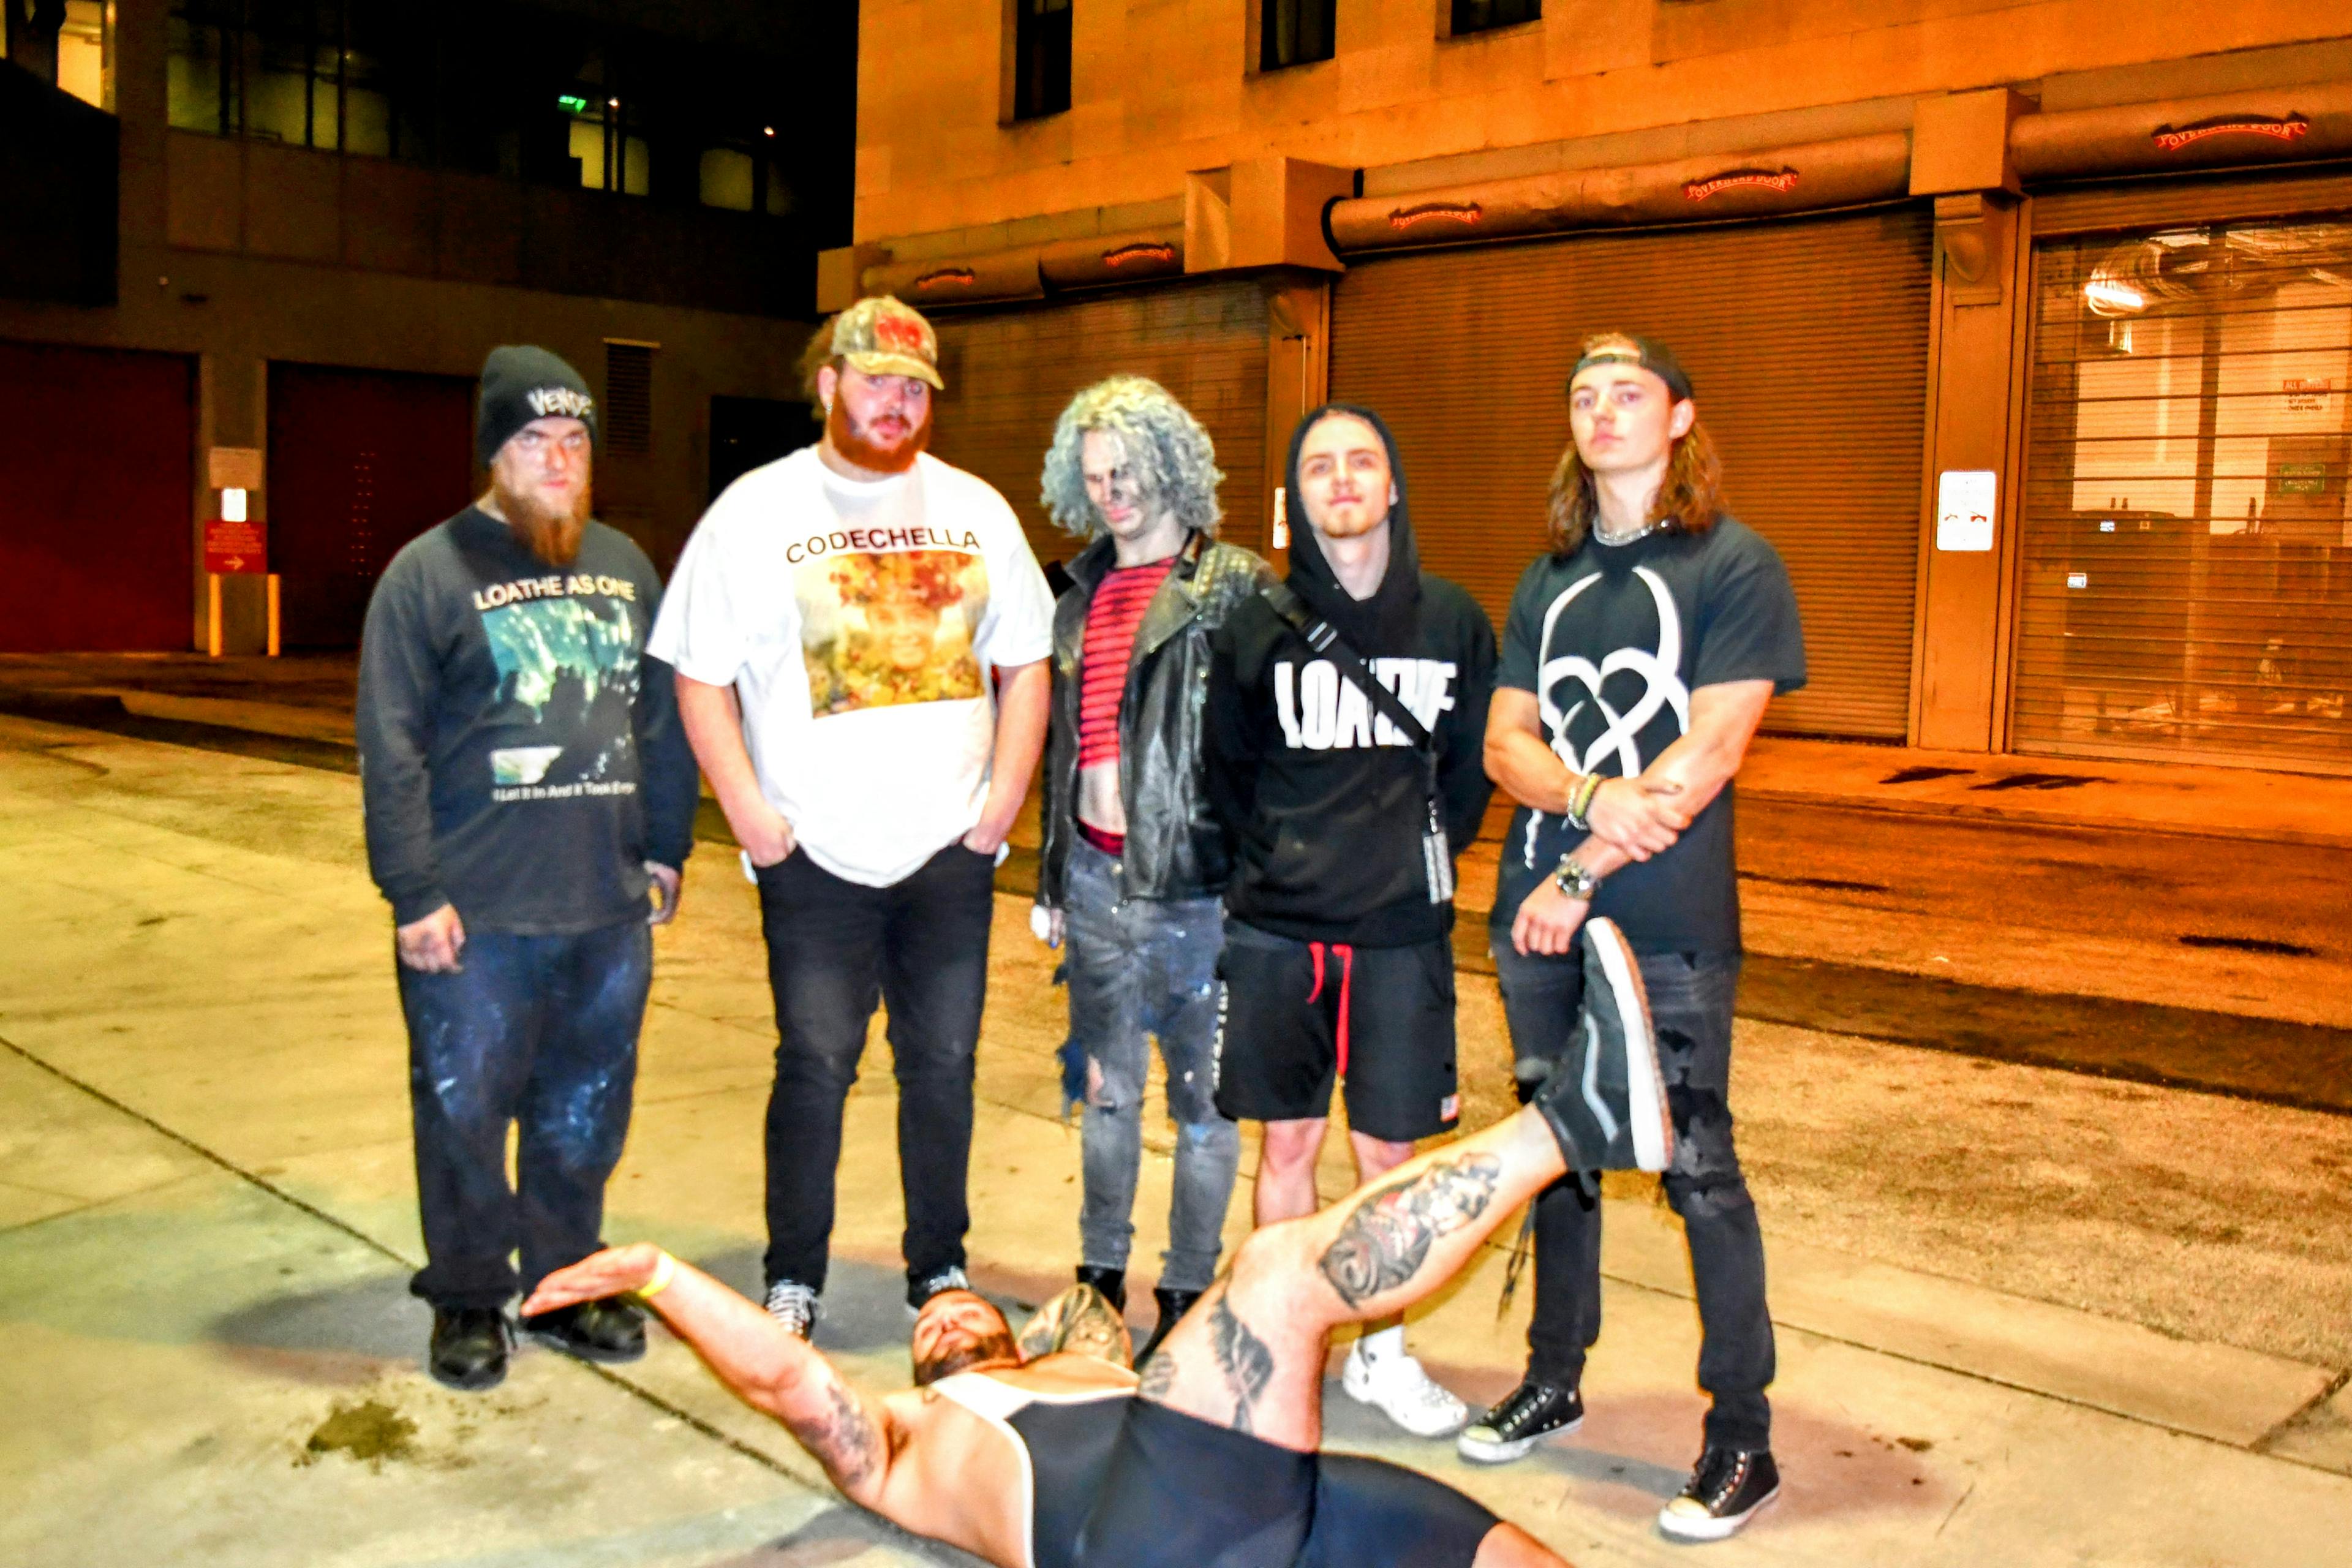 In 2022, I had the privilege of catching up with Vended after their performance with Code Orange in Baltimore. One of my favorite things about this interview is that it takes place in the alley behind Baltimore Soundstage, a place full of some of the most colorful characters.